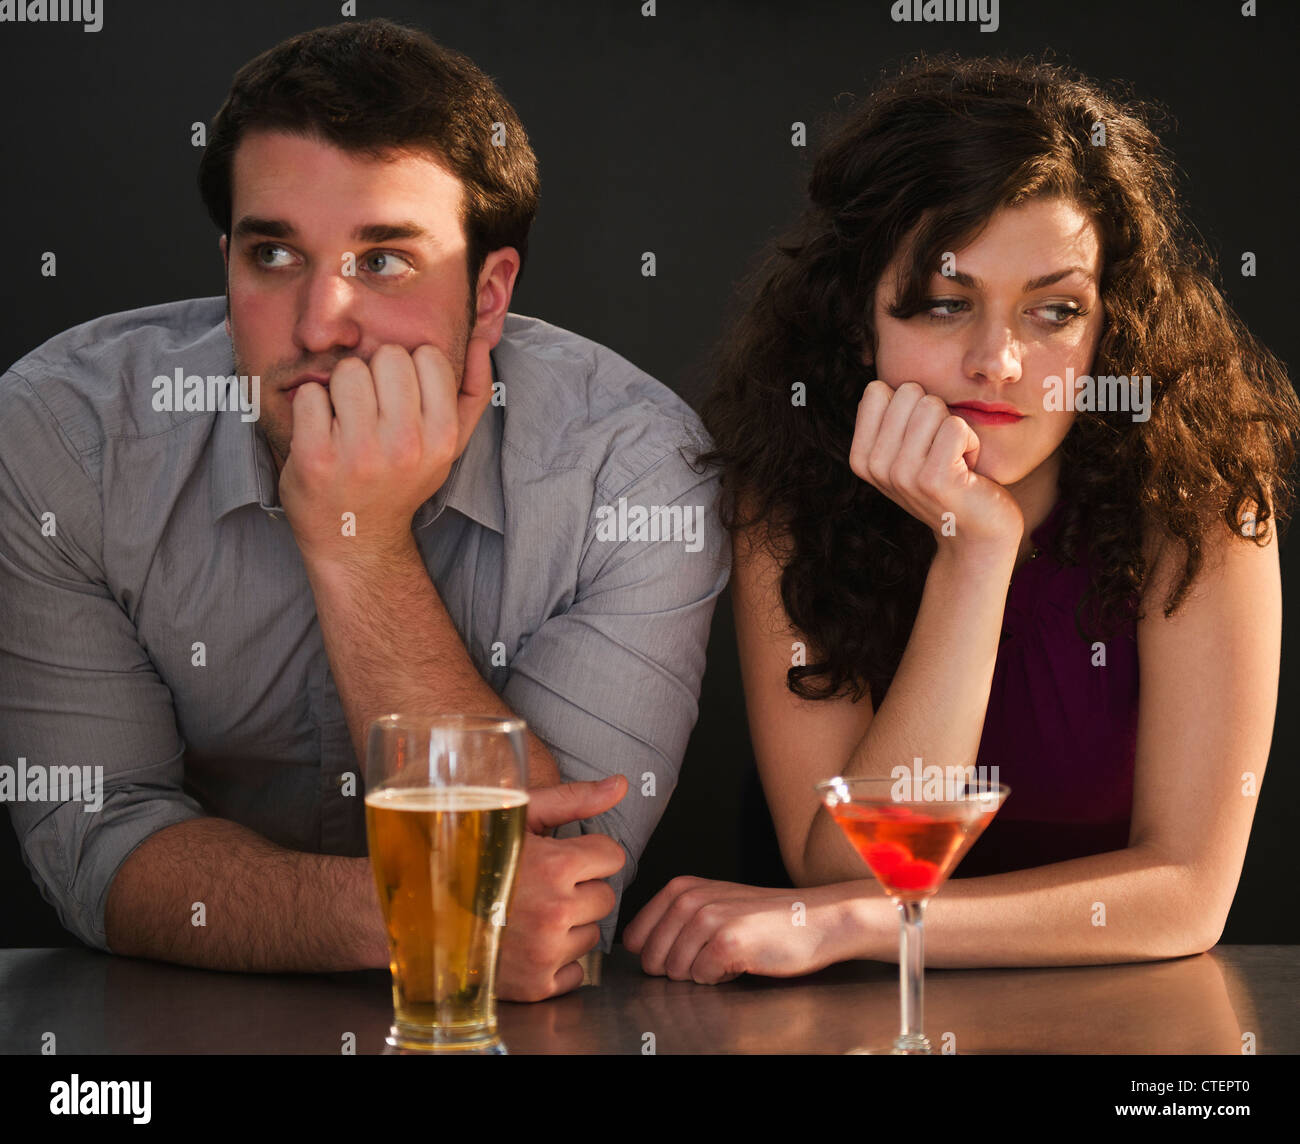 USA, New Jersey, Jersey City, Bored couple sitting at bar counter Stock ...